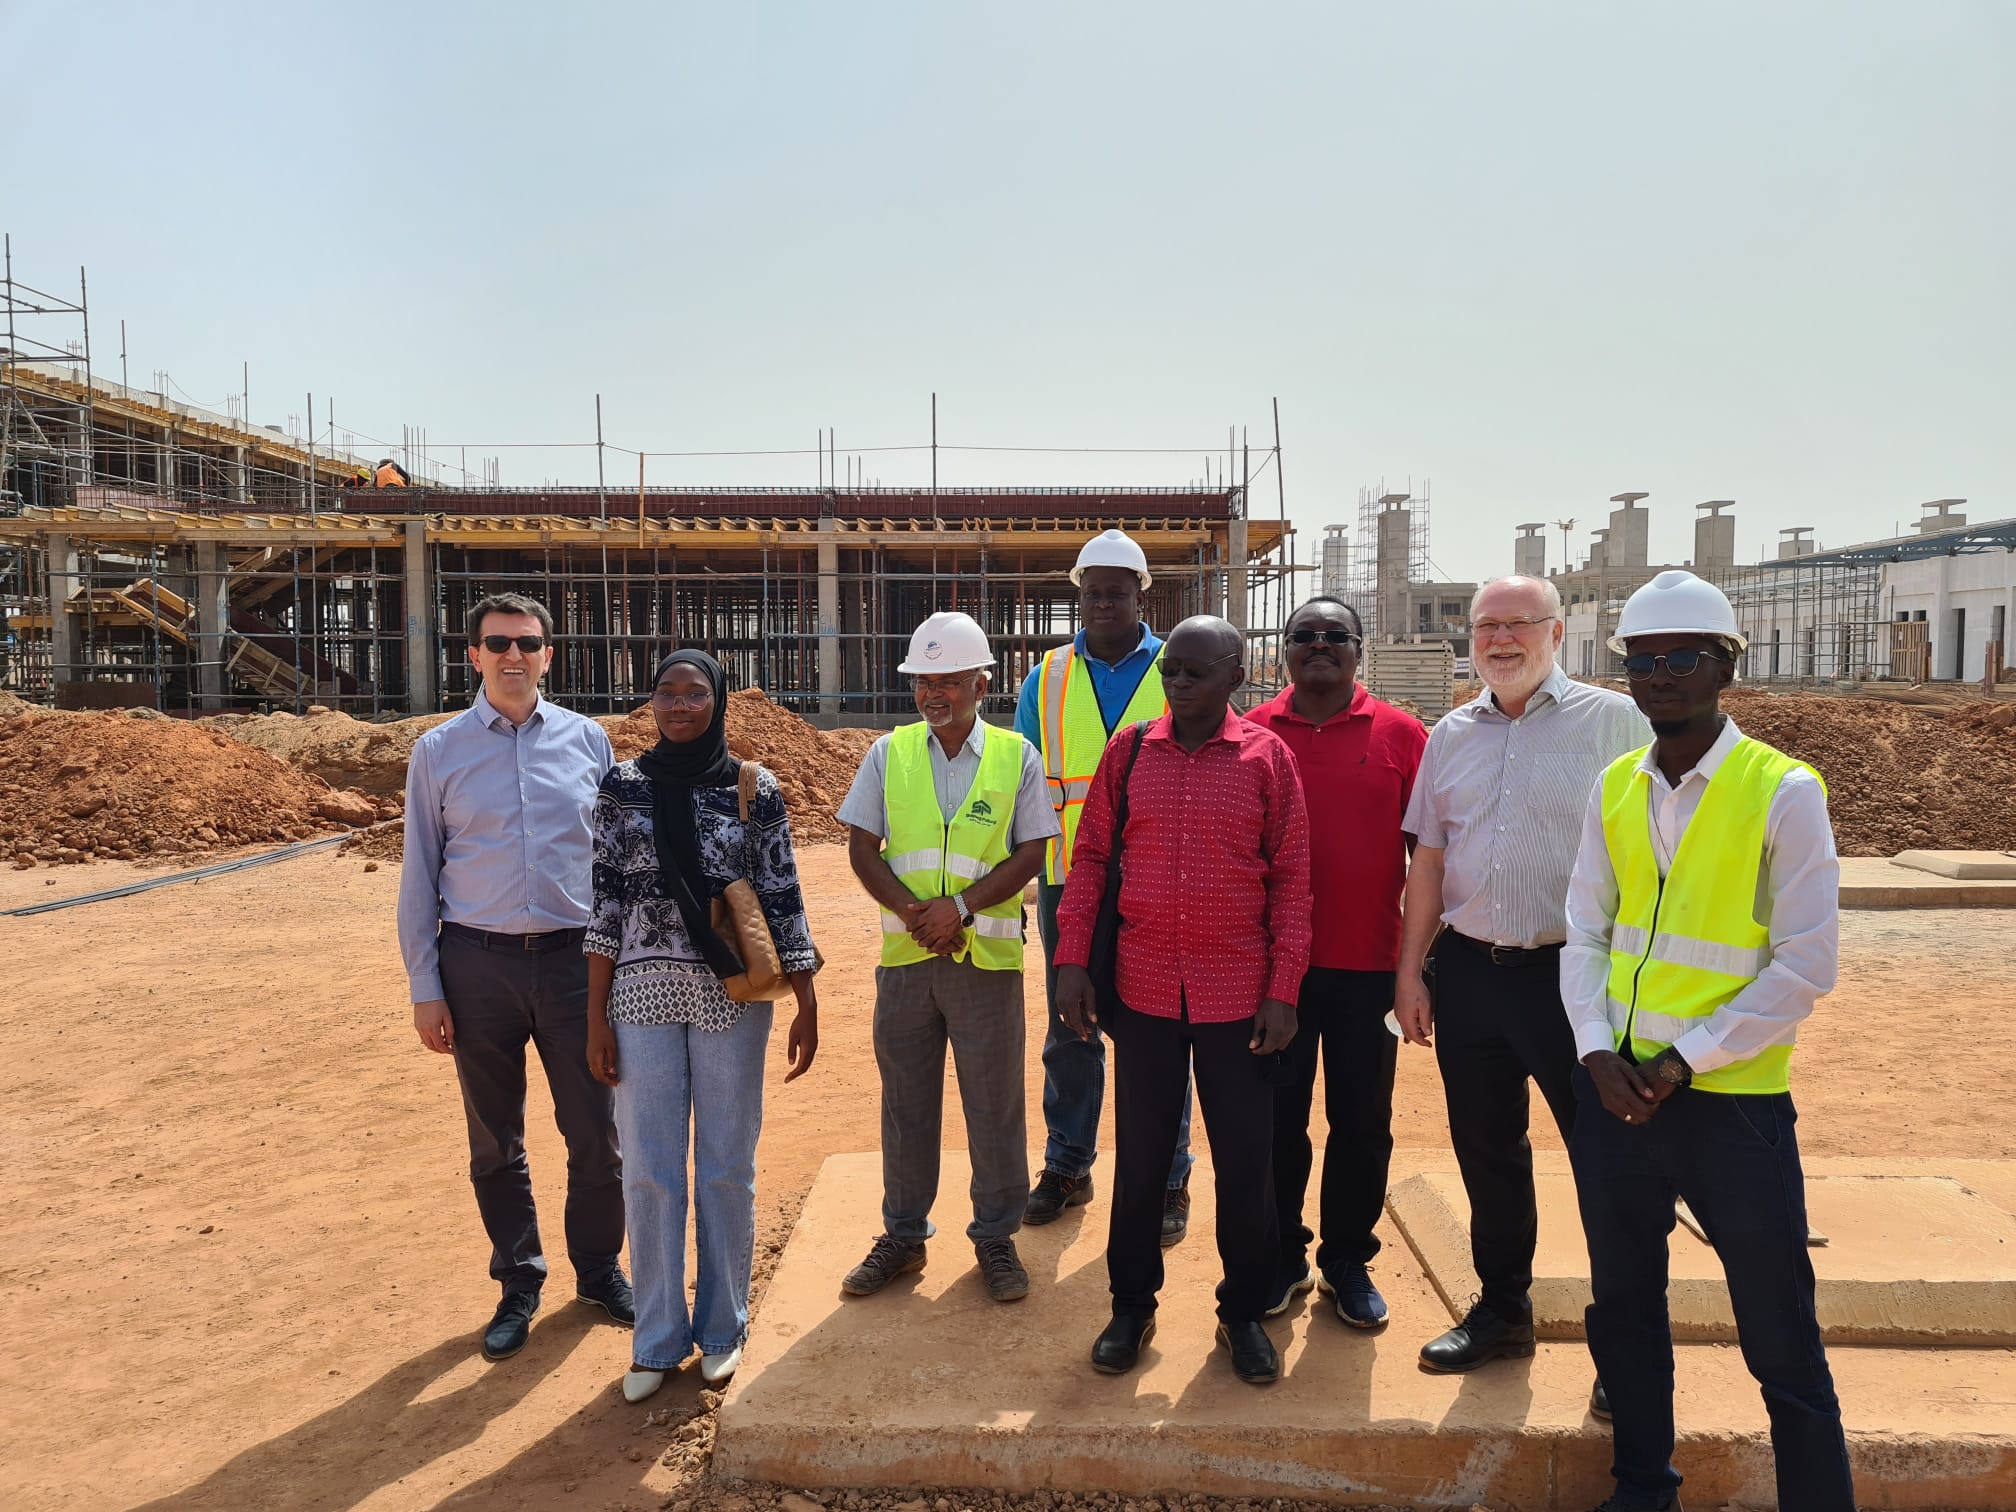 The imPACT Review team visited Farato site where the first radiotherapy facility will be located.